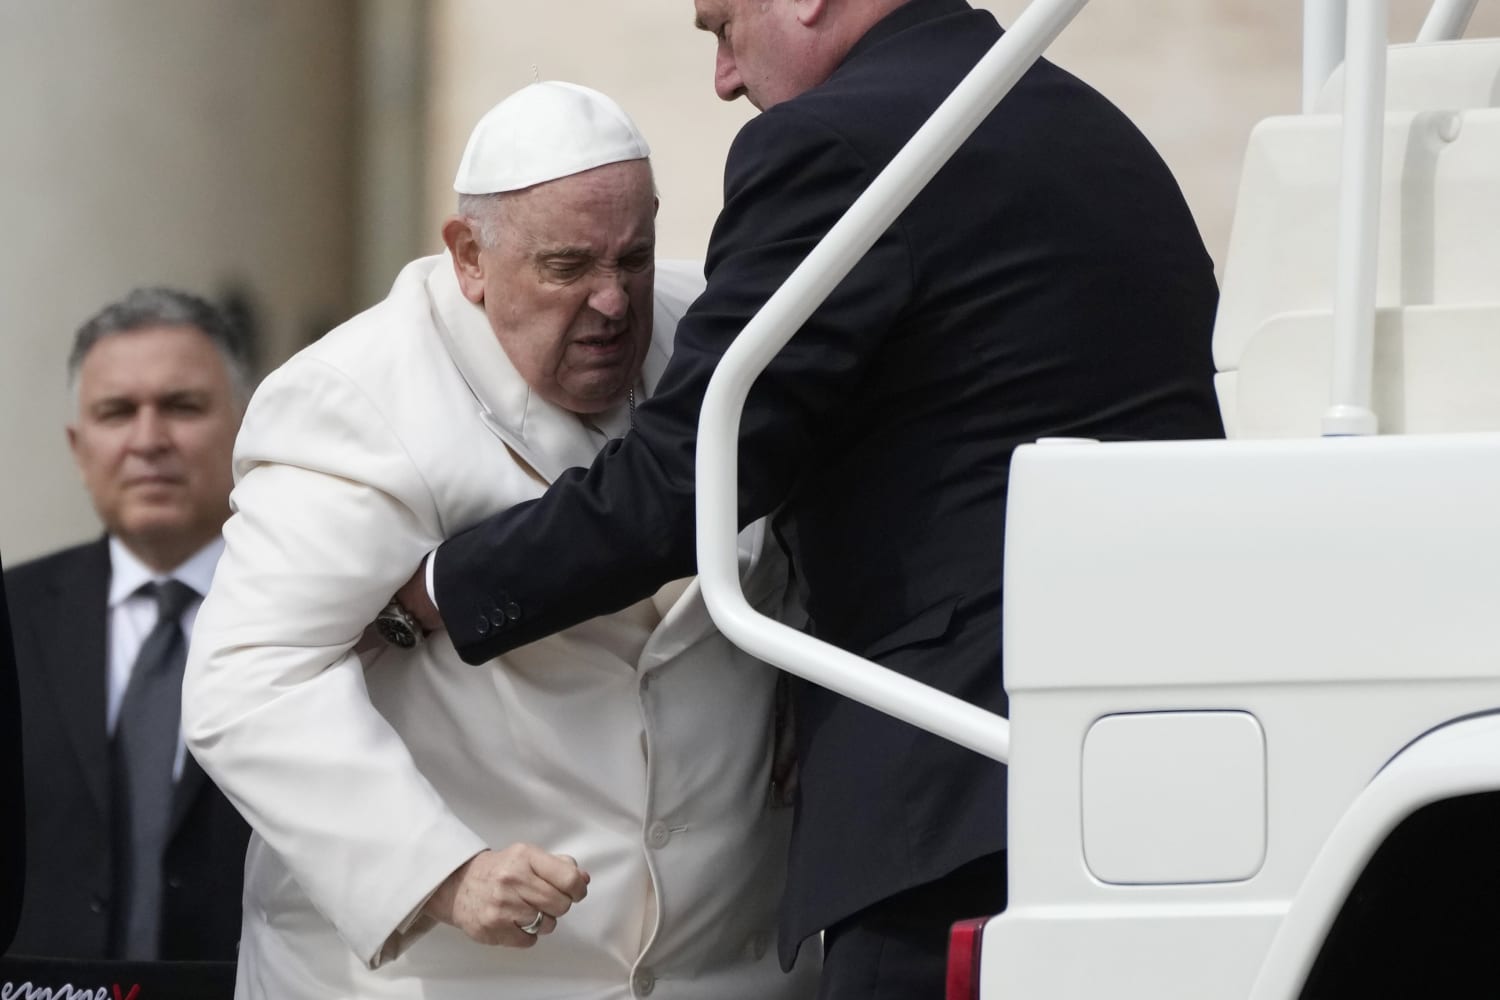 Pope Francis 'improving' in hospital after quiet night, Vatican says